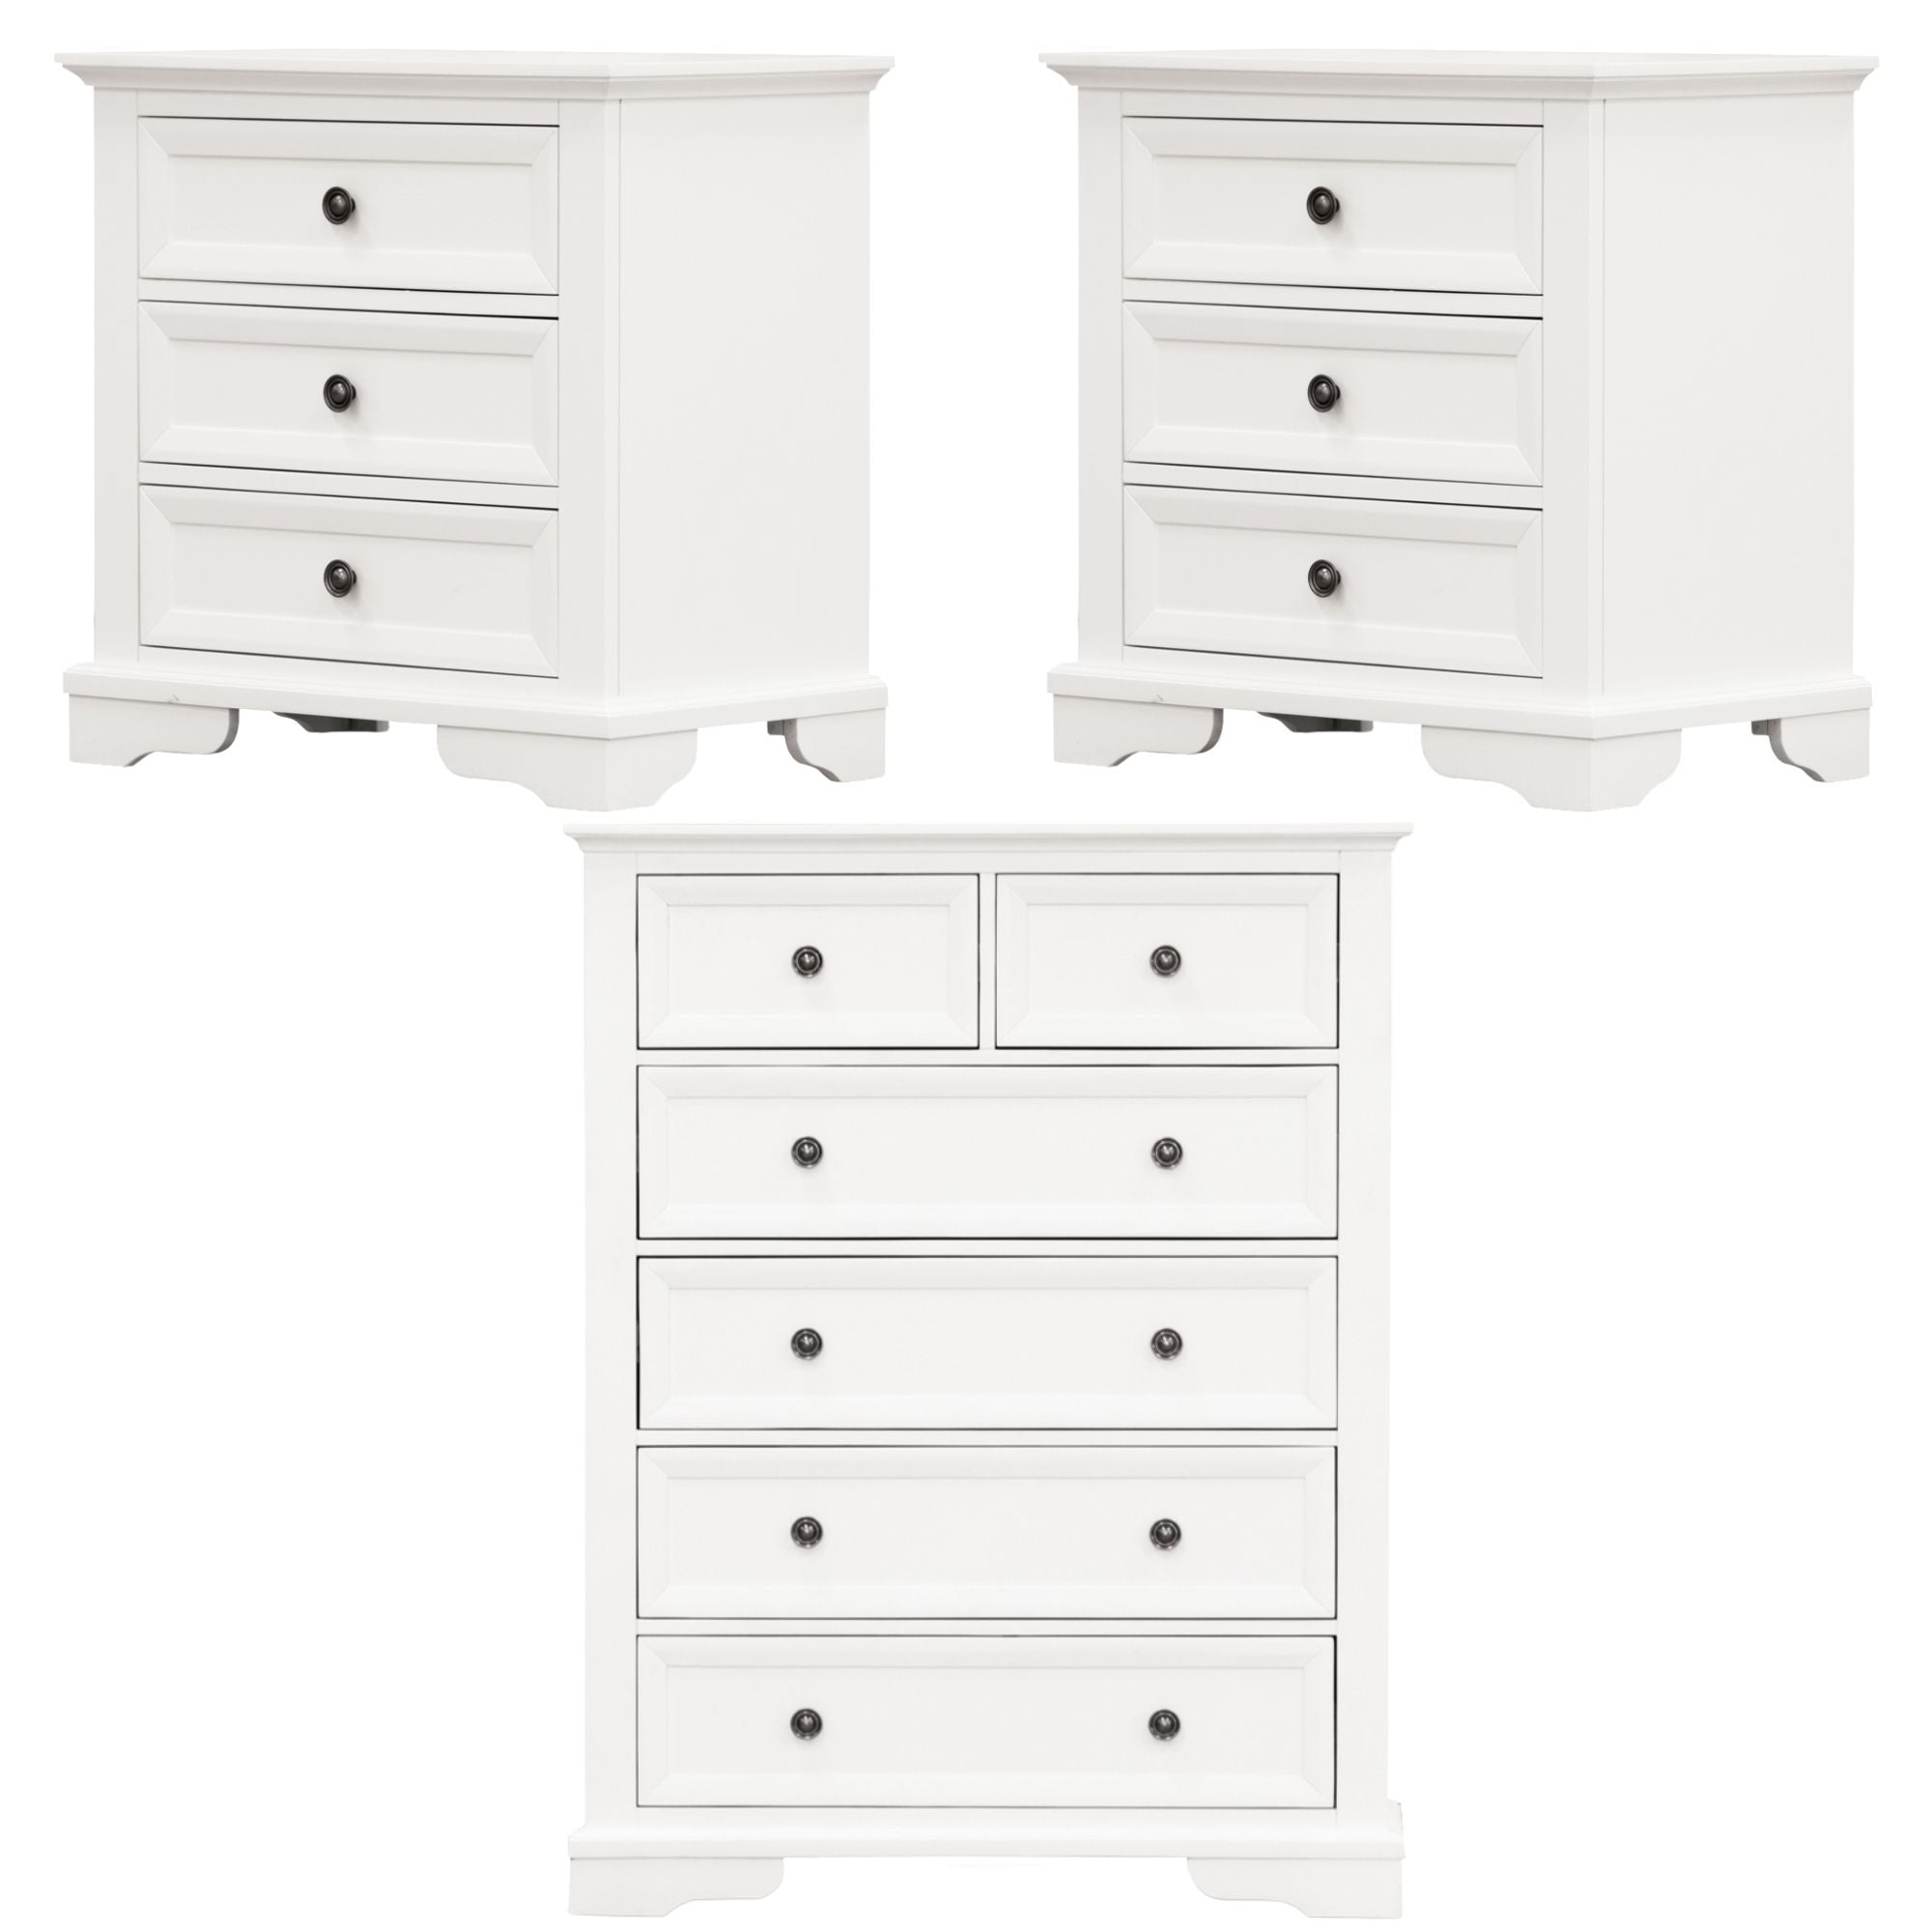 No Assembly Required! Two Bedside Tables and Tallboy Matching Bundle - White